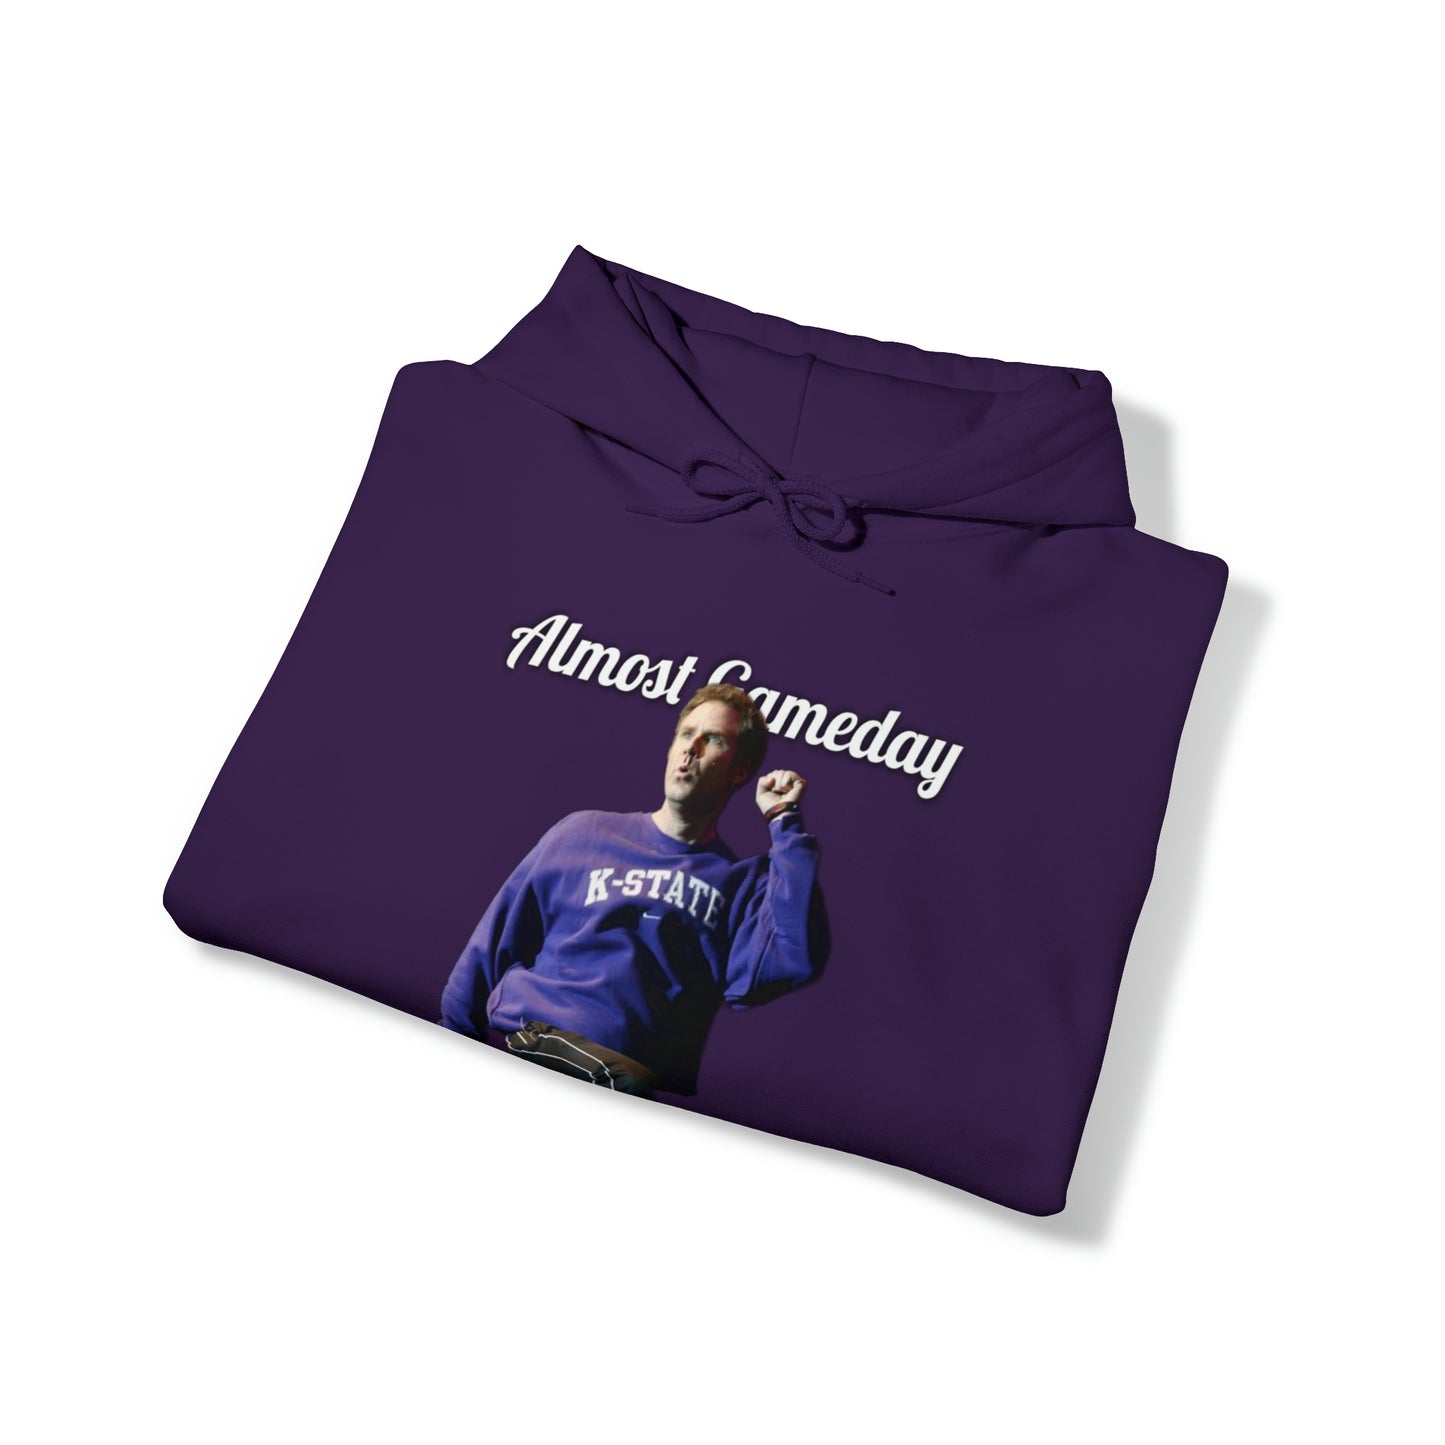 Almost Gameday Will Ferrell Hoodie